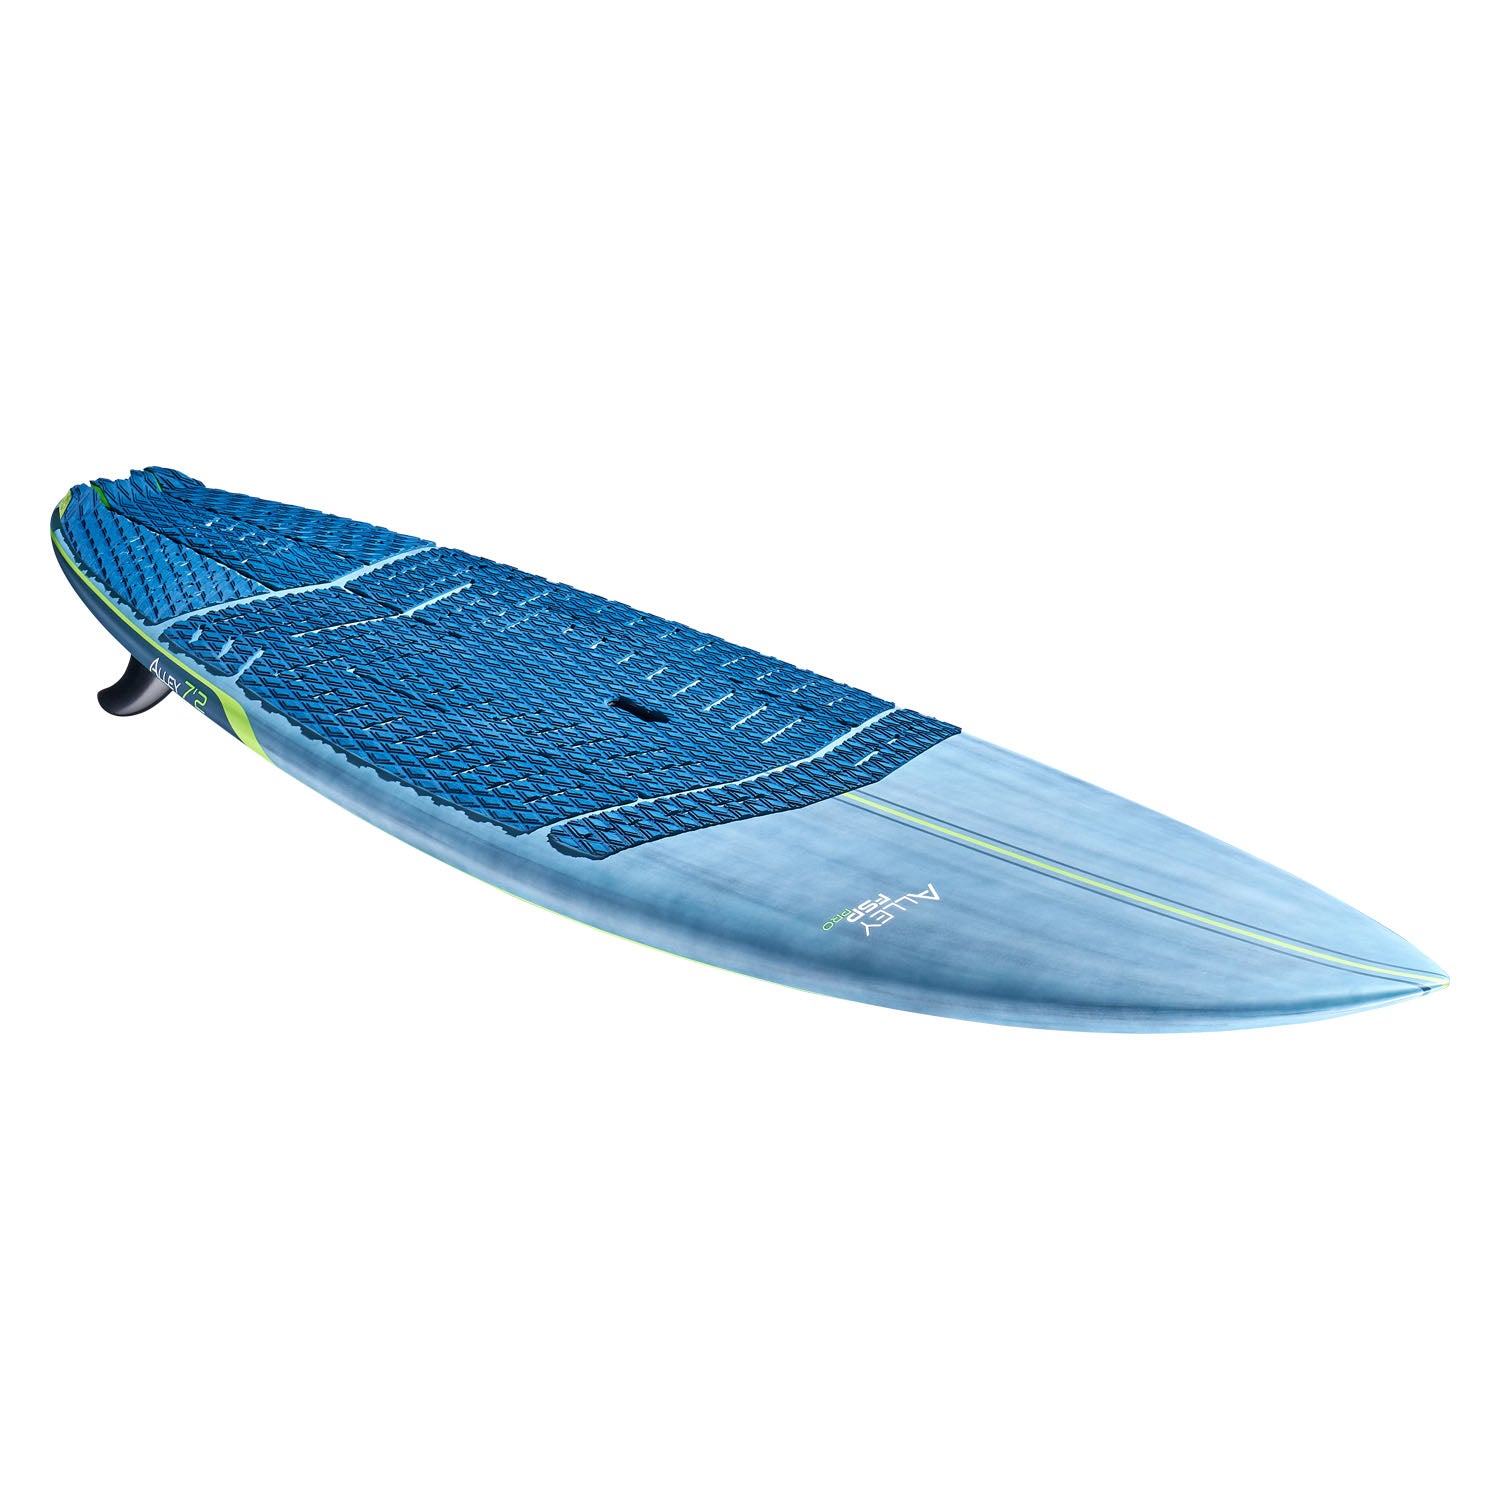 GONG | SUP Alley FSP Pro